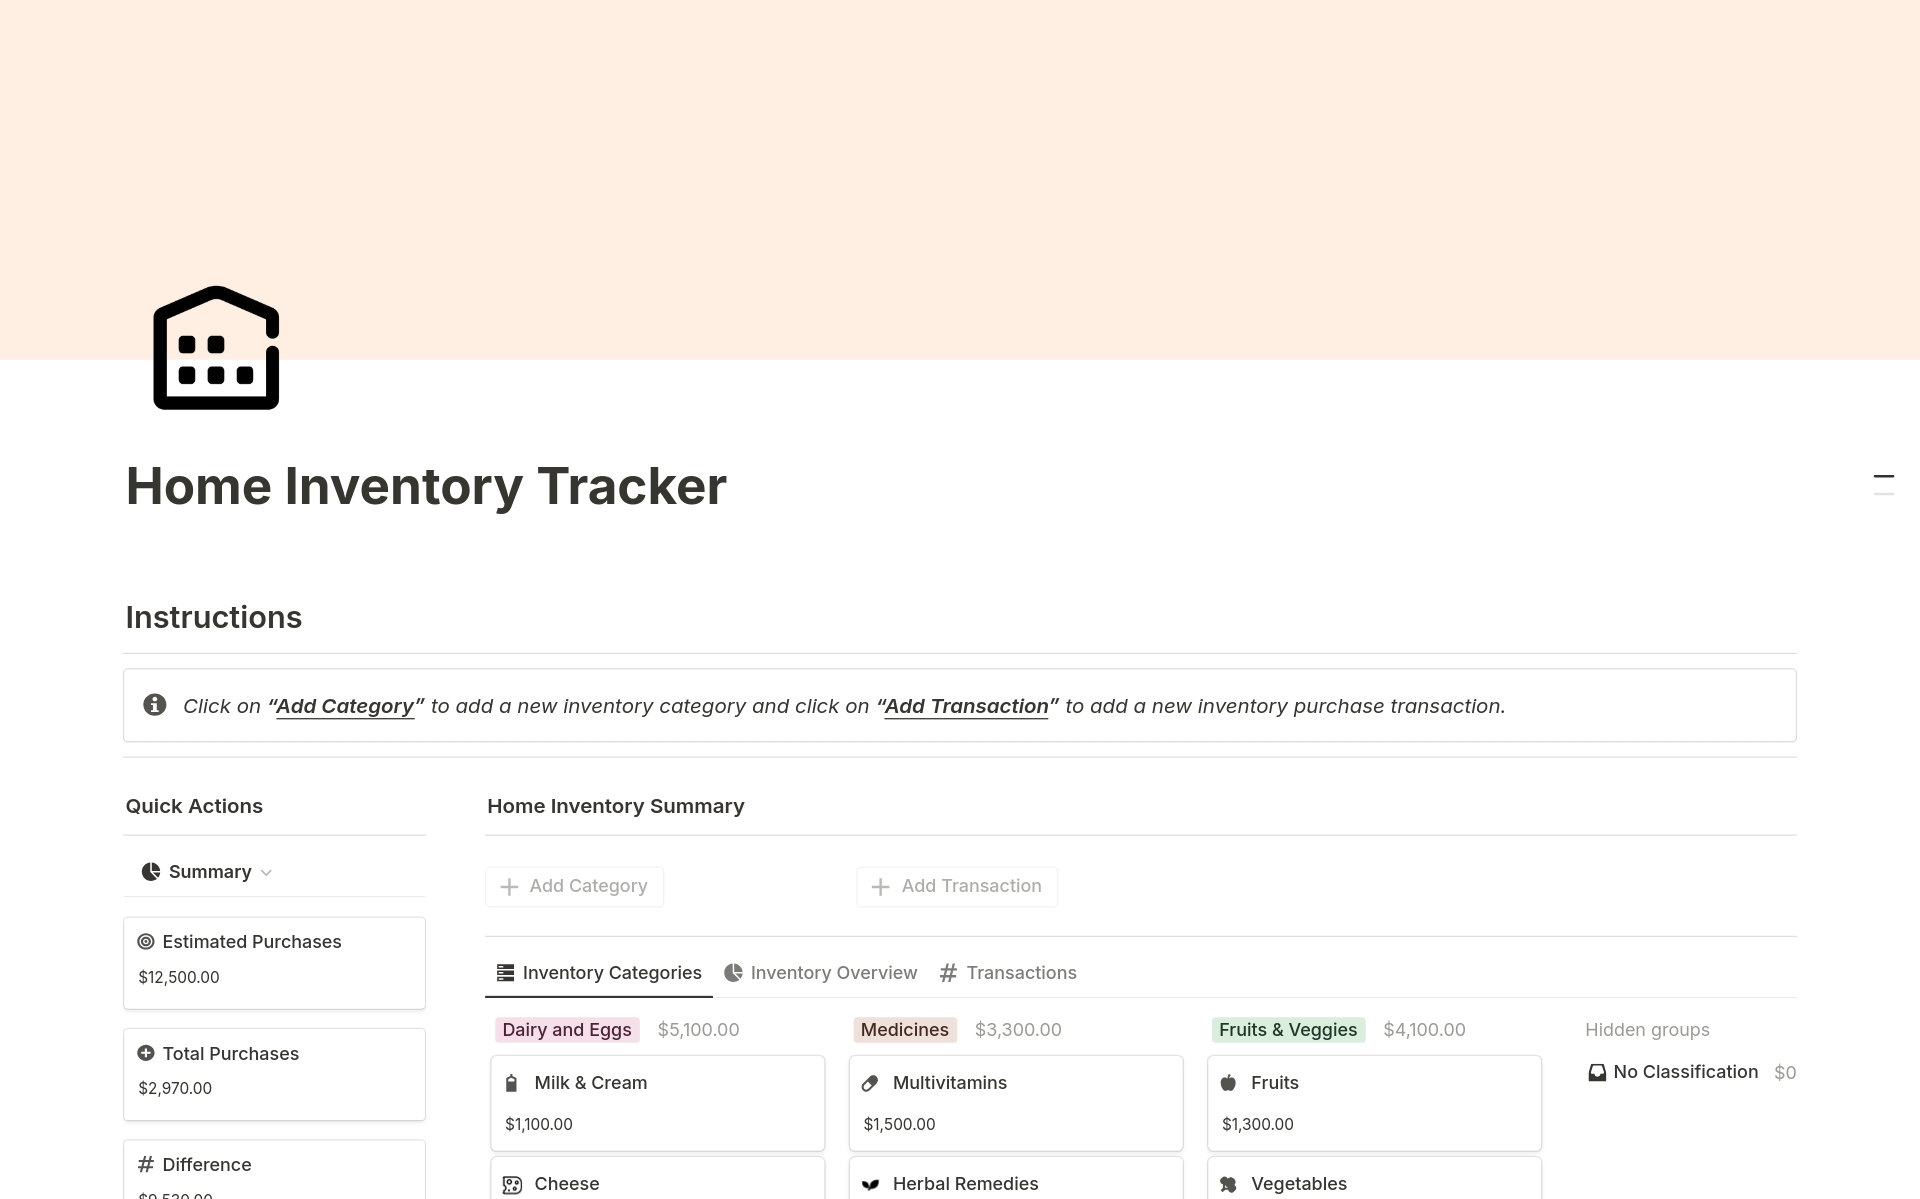 Ideal for those who are looking to manage their home inventory, this tracker helps you keep track of home inventory, total purchases, total consumption and units available and much more.